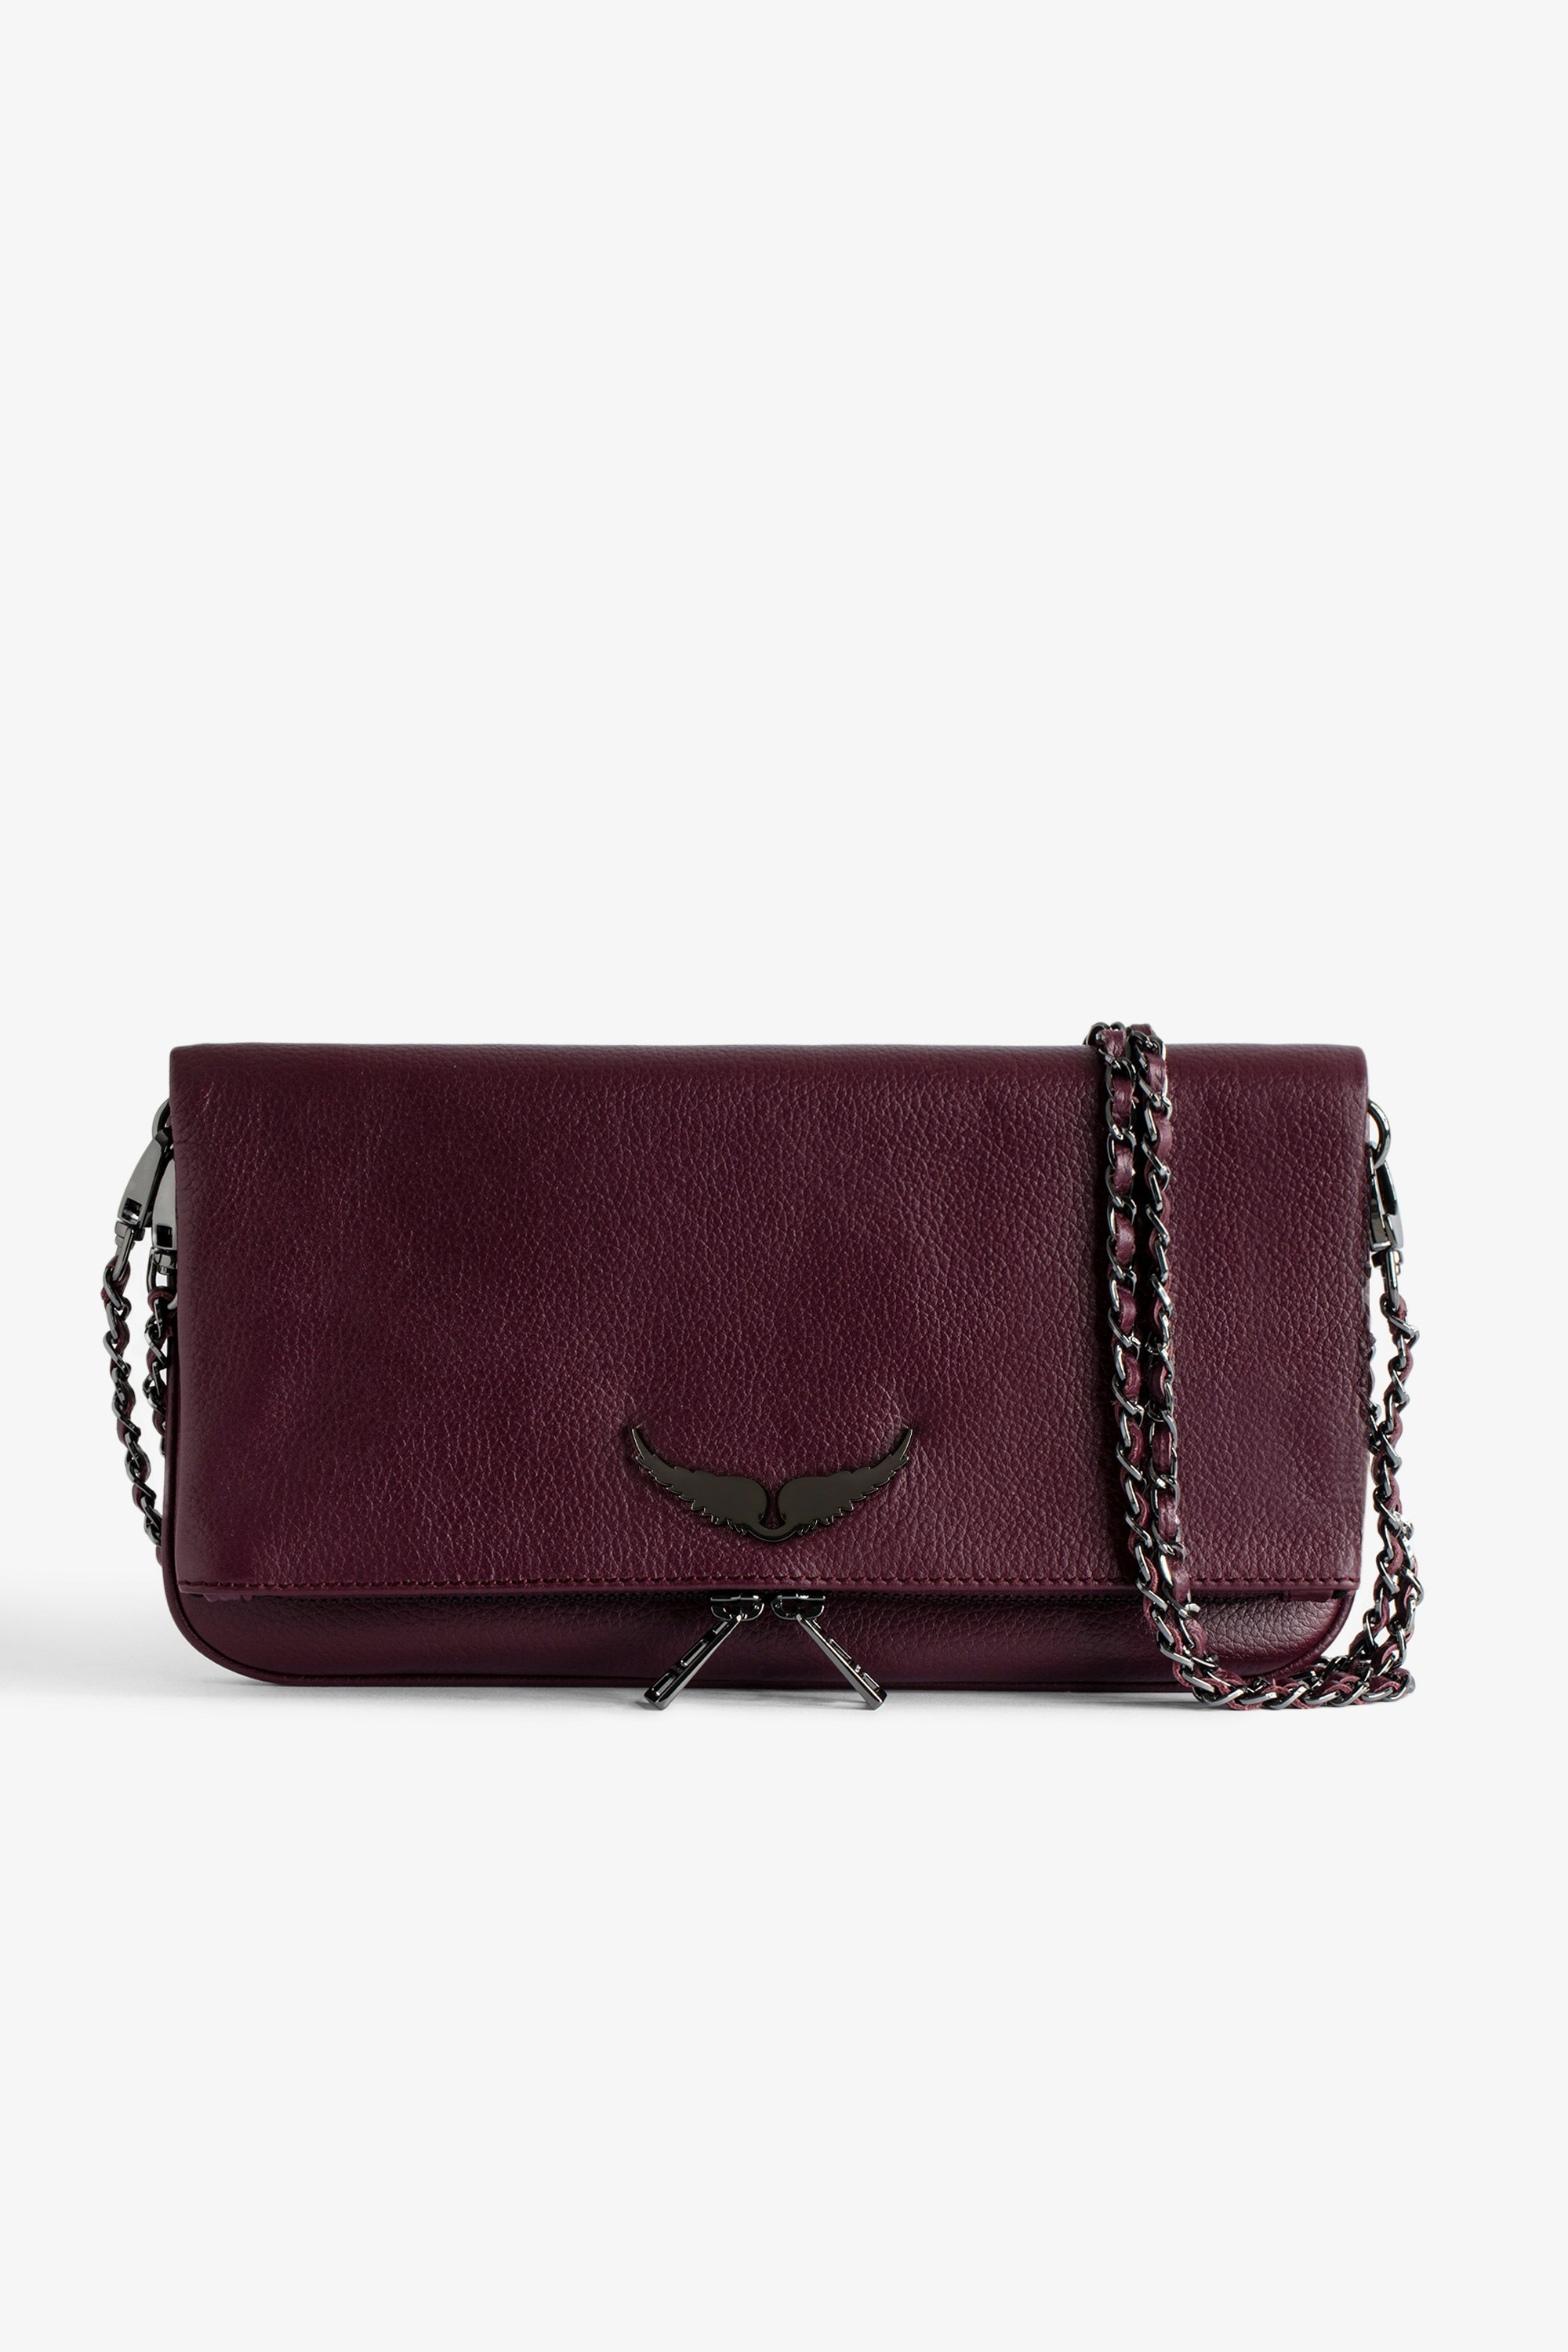 Pochette Rock - Women’s burgundy grained leather clutch with double leather and metal chain strap.